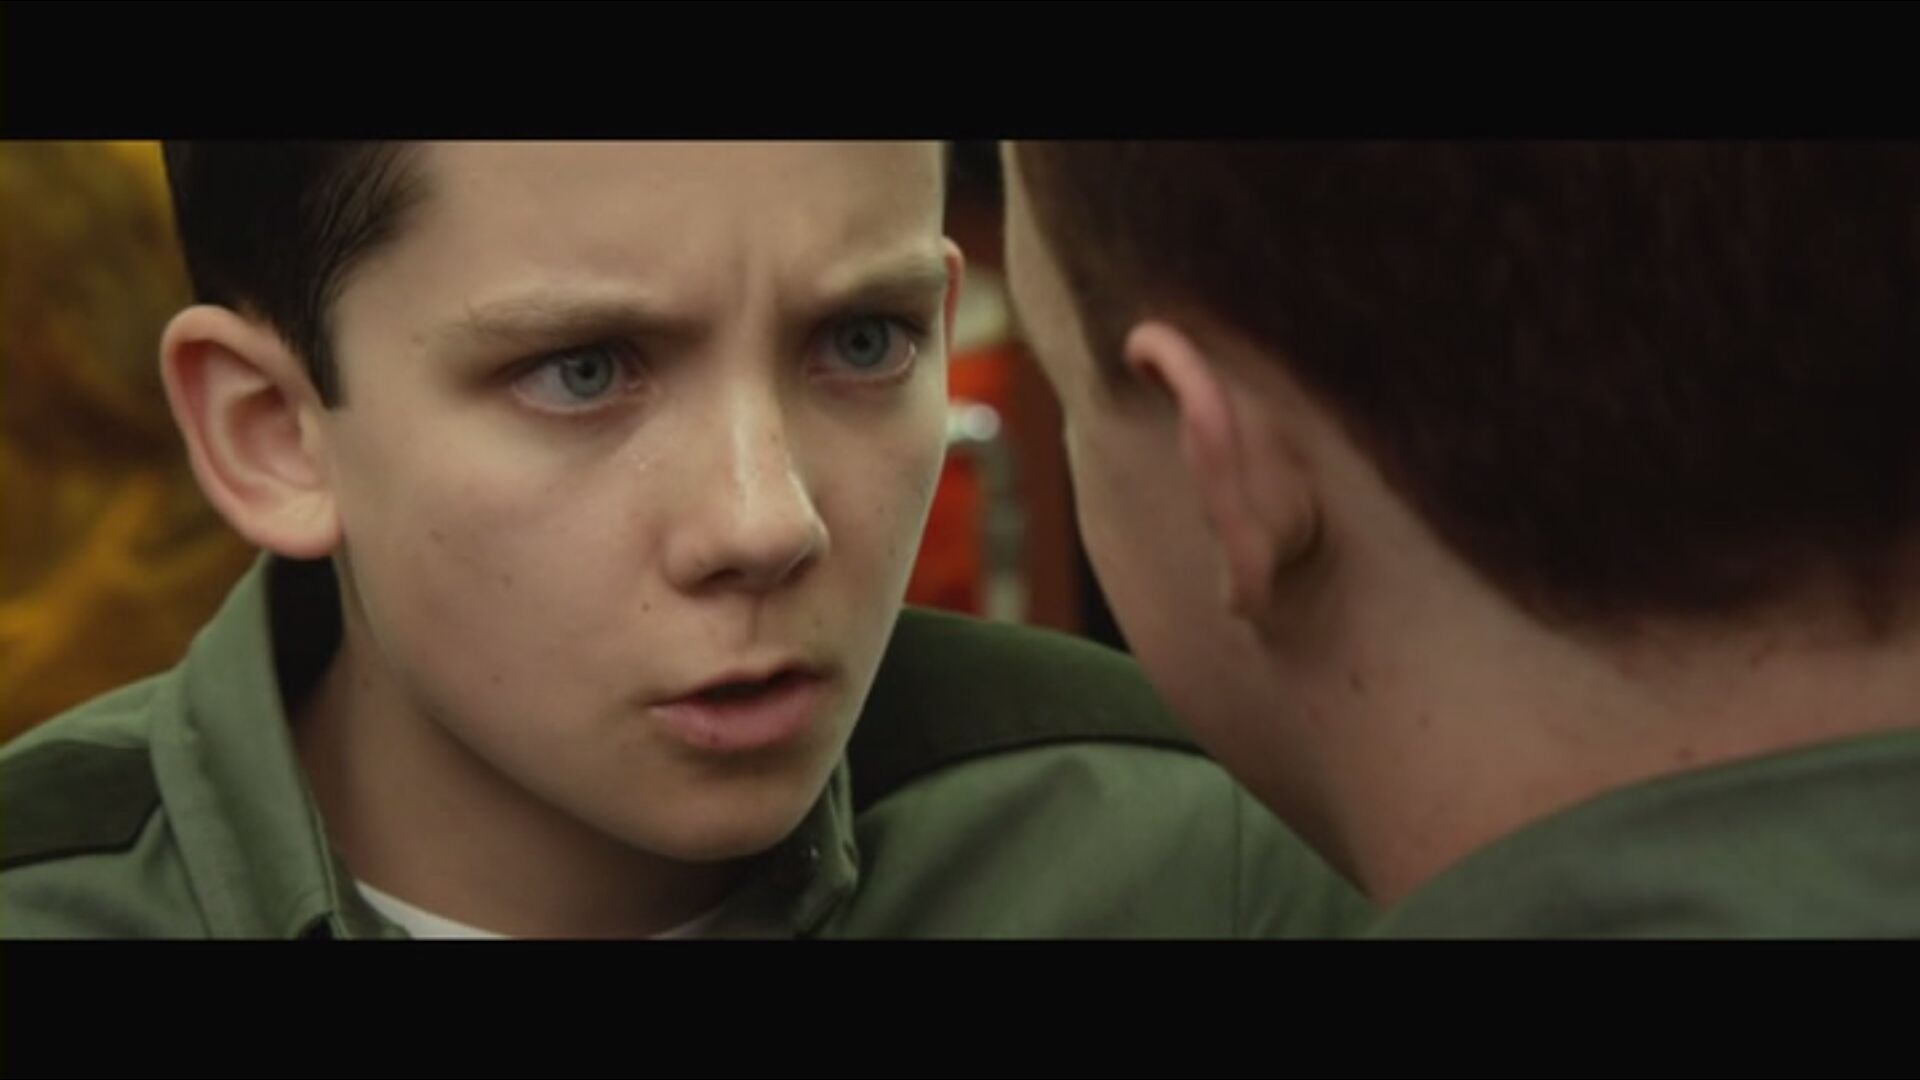 Asa Butterfield in Ender's Game